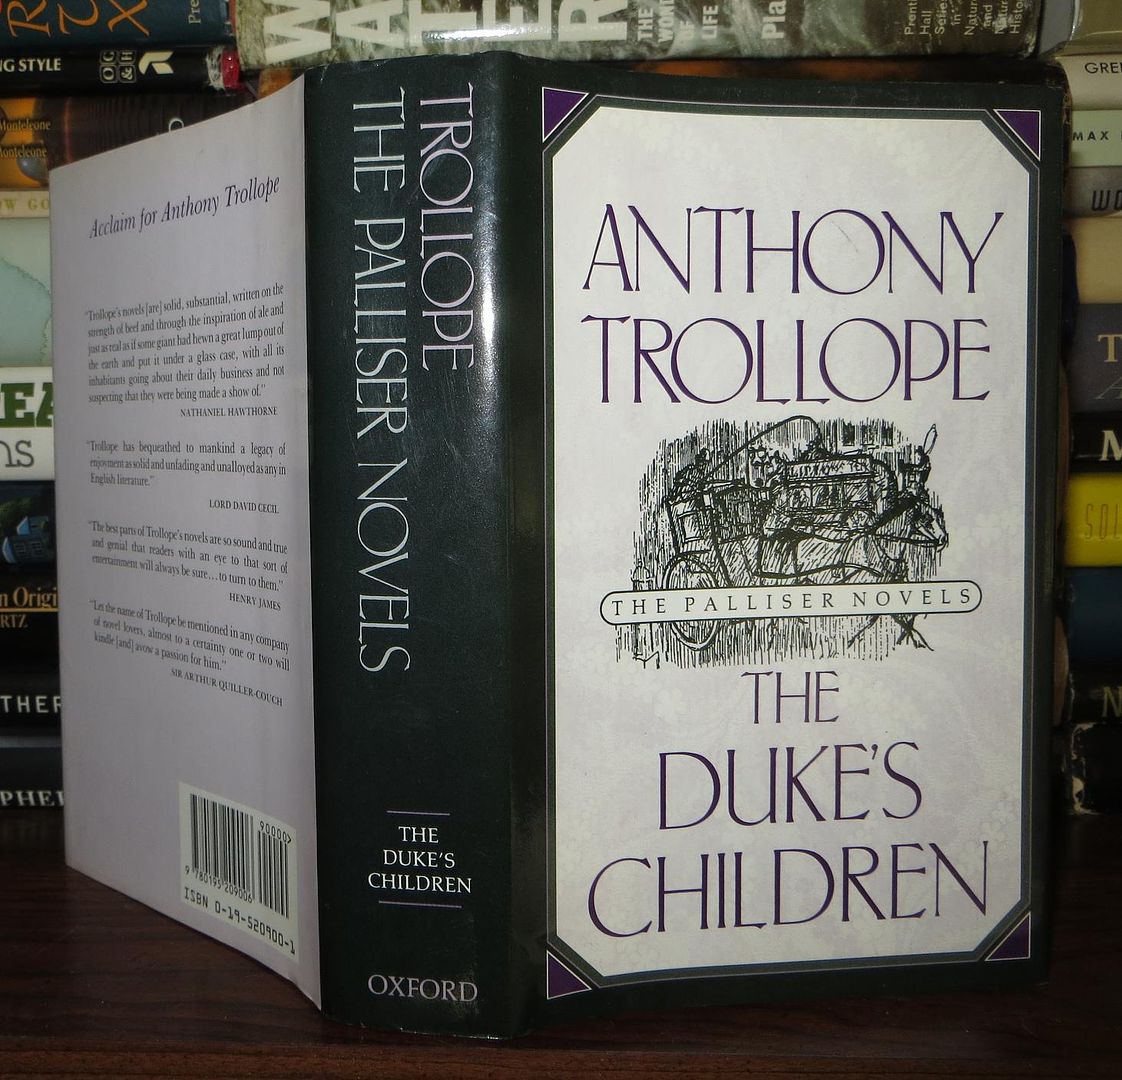 TROLLOPE, ANTHONY & HERMIONE LEE & CHARLES MOZLEY - The Duke's Children